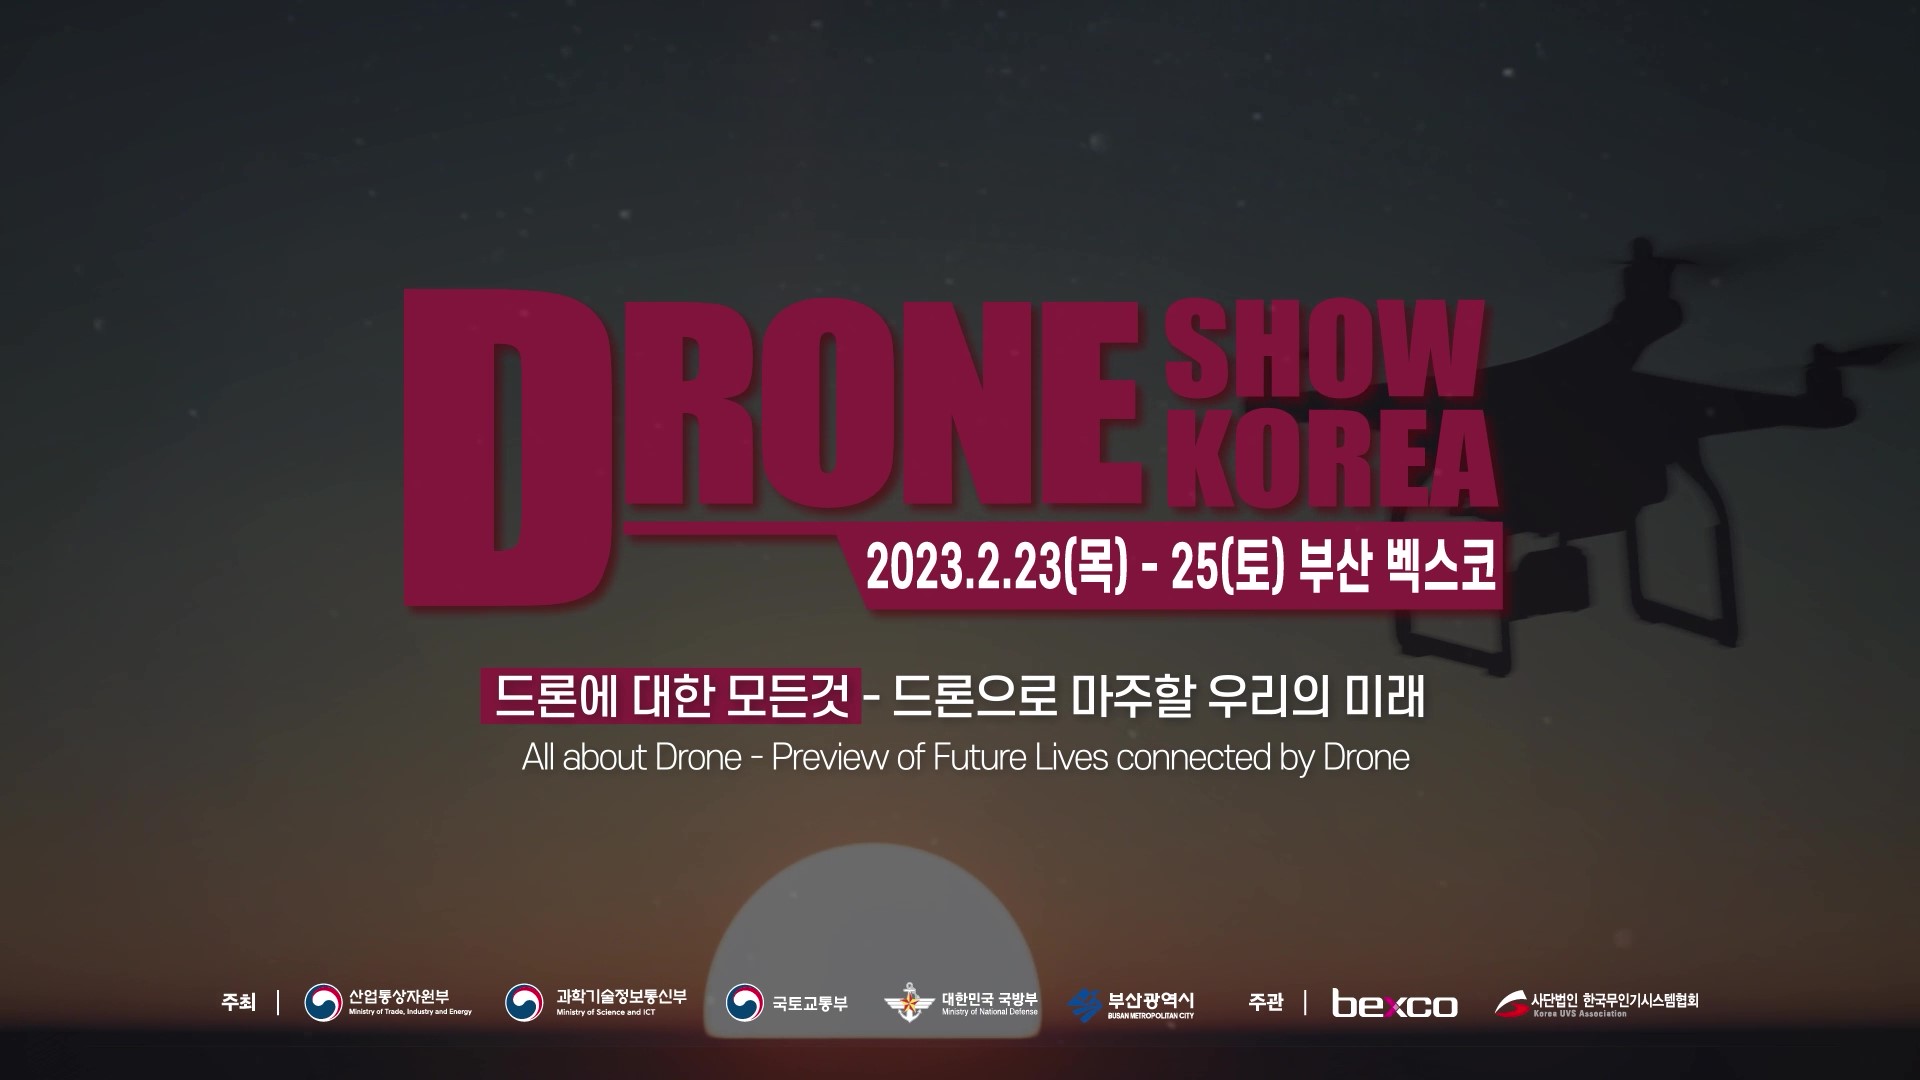 DRONE SHOW KOREA 2023.2.23(목)-25(토) 부산 벡스코 드론에 대한 모든것 - 드론으로 마주할 우리의 미래 All about Drone - Preview of Future Lives connected by Drone